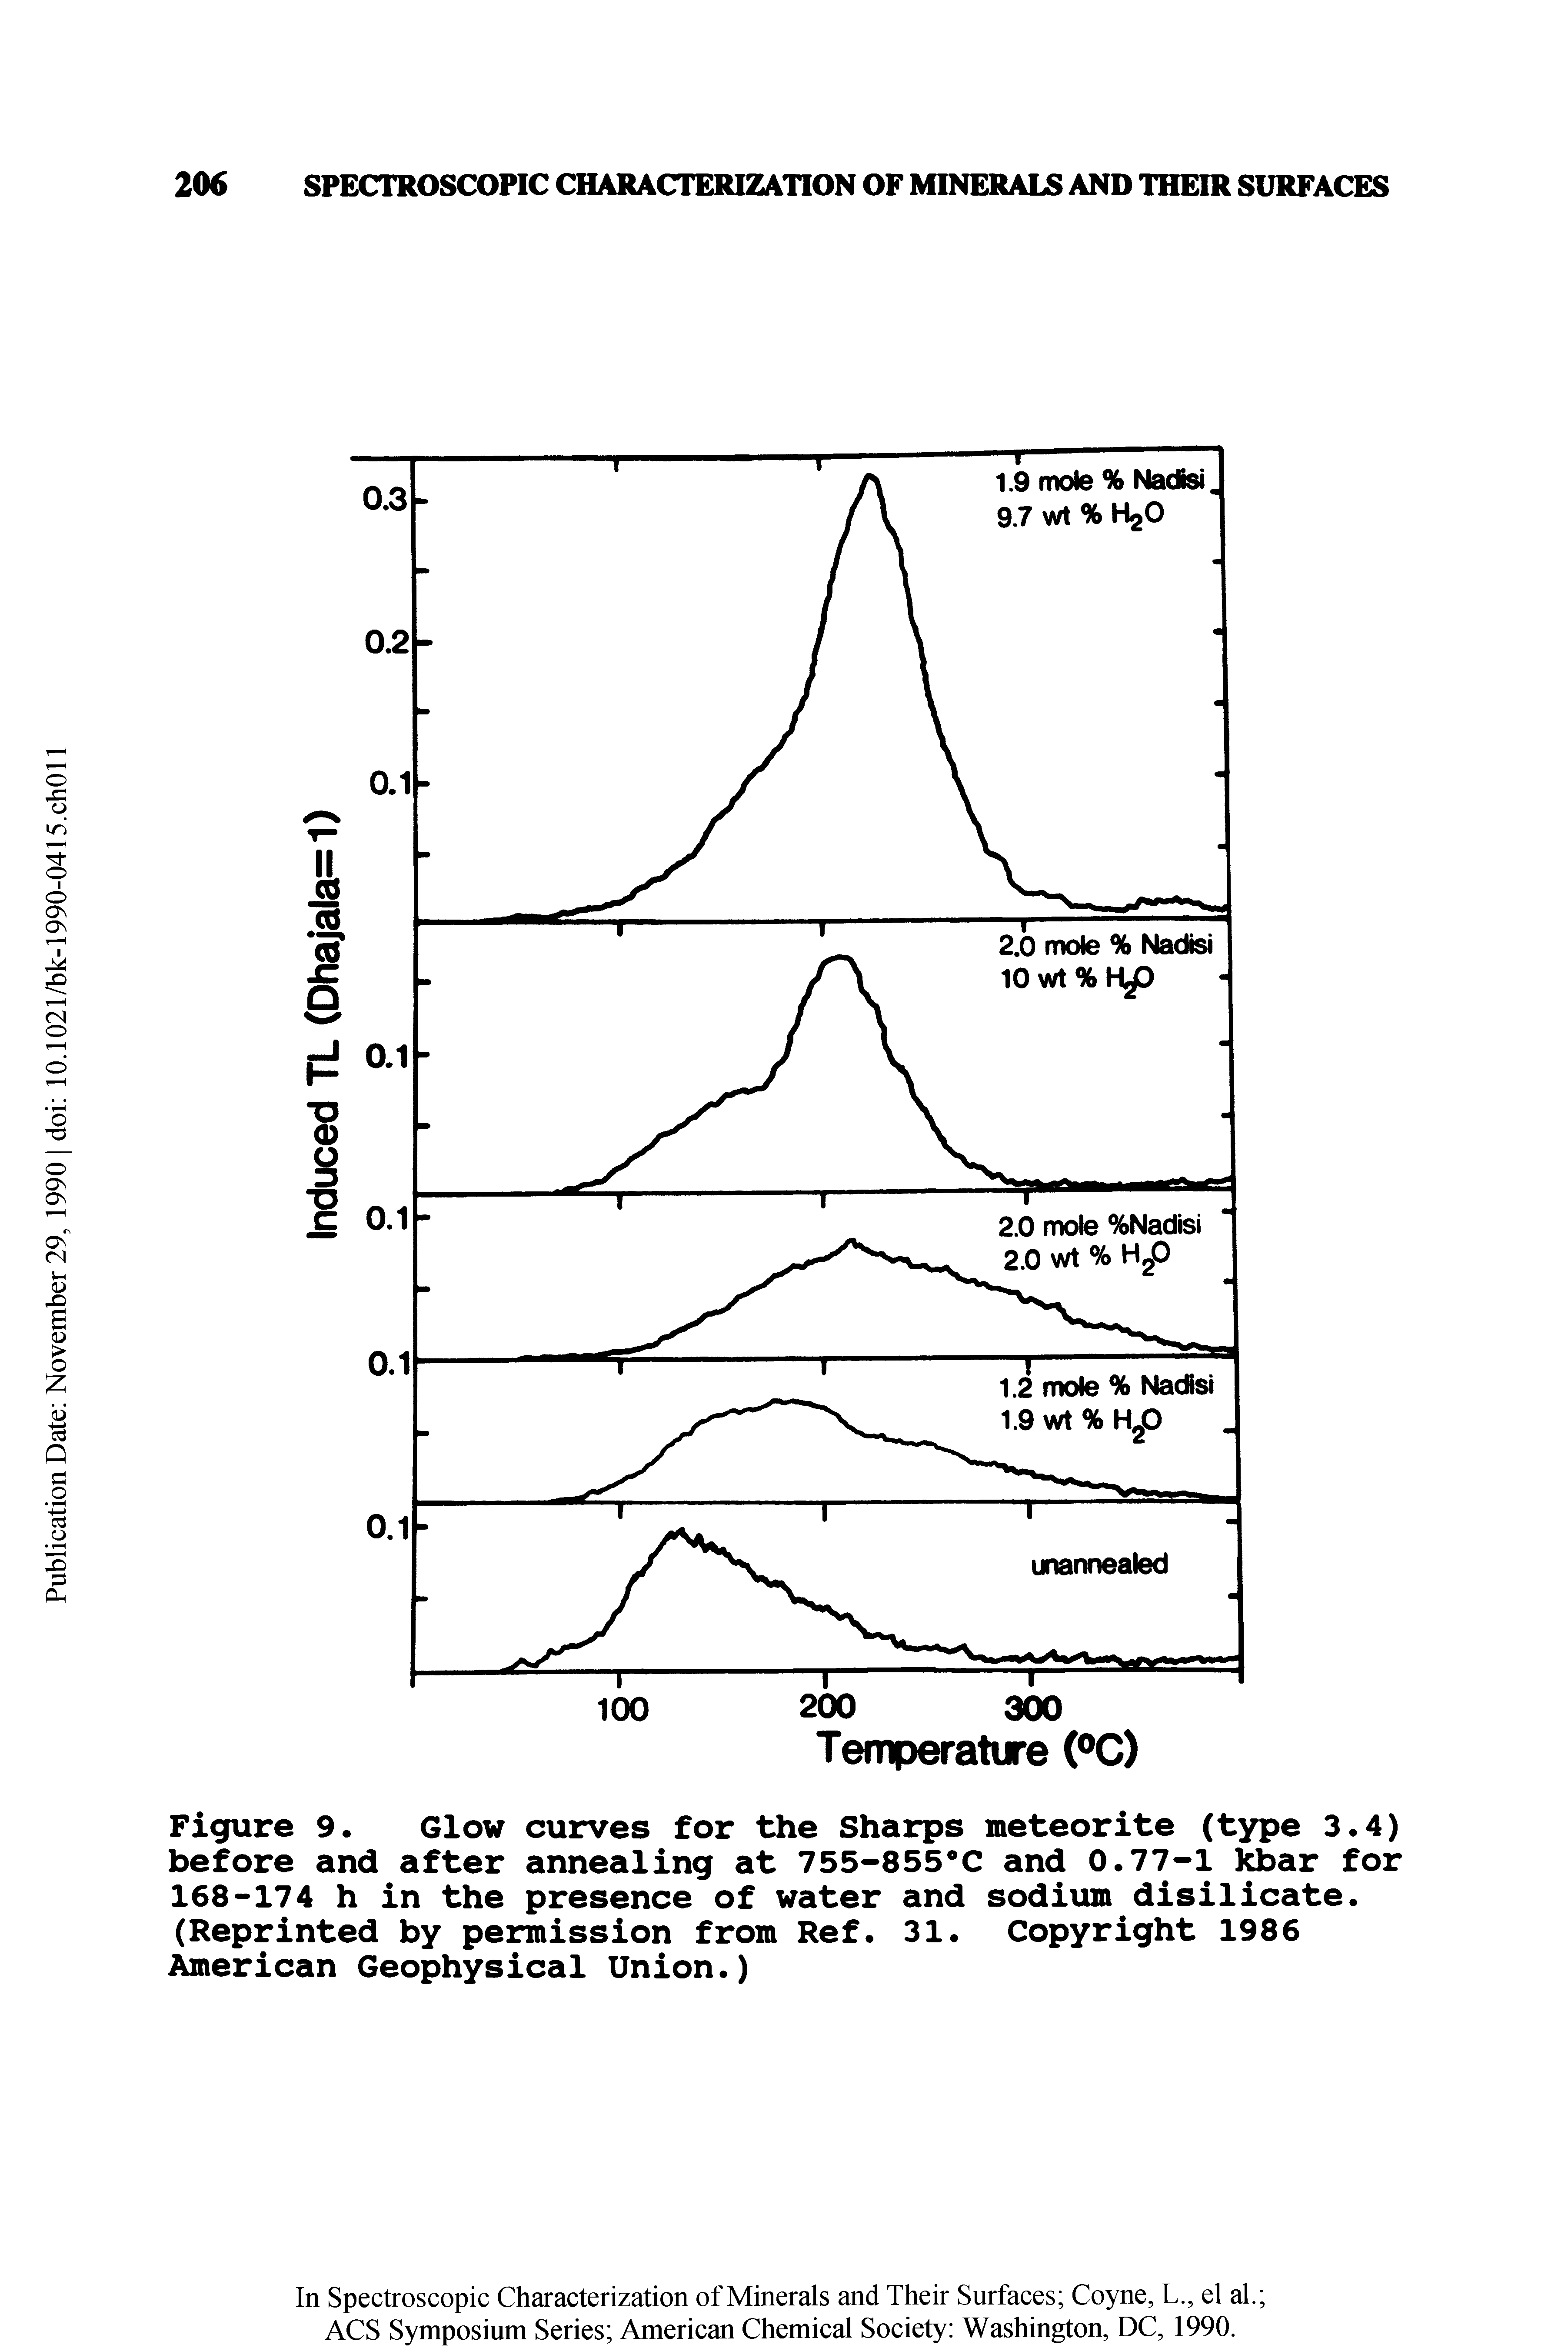 Figure 9. Glow curves for the Sharps meteorite (type 3.4) before and after annealing at 755-855°C and 0.77-1 kbar for 168-174 h in the presence of water and sodium disilicate. (Reprinted by permission from Ref. 31. Copyright 1986 American Geophysical Union.)...